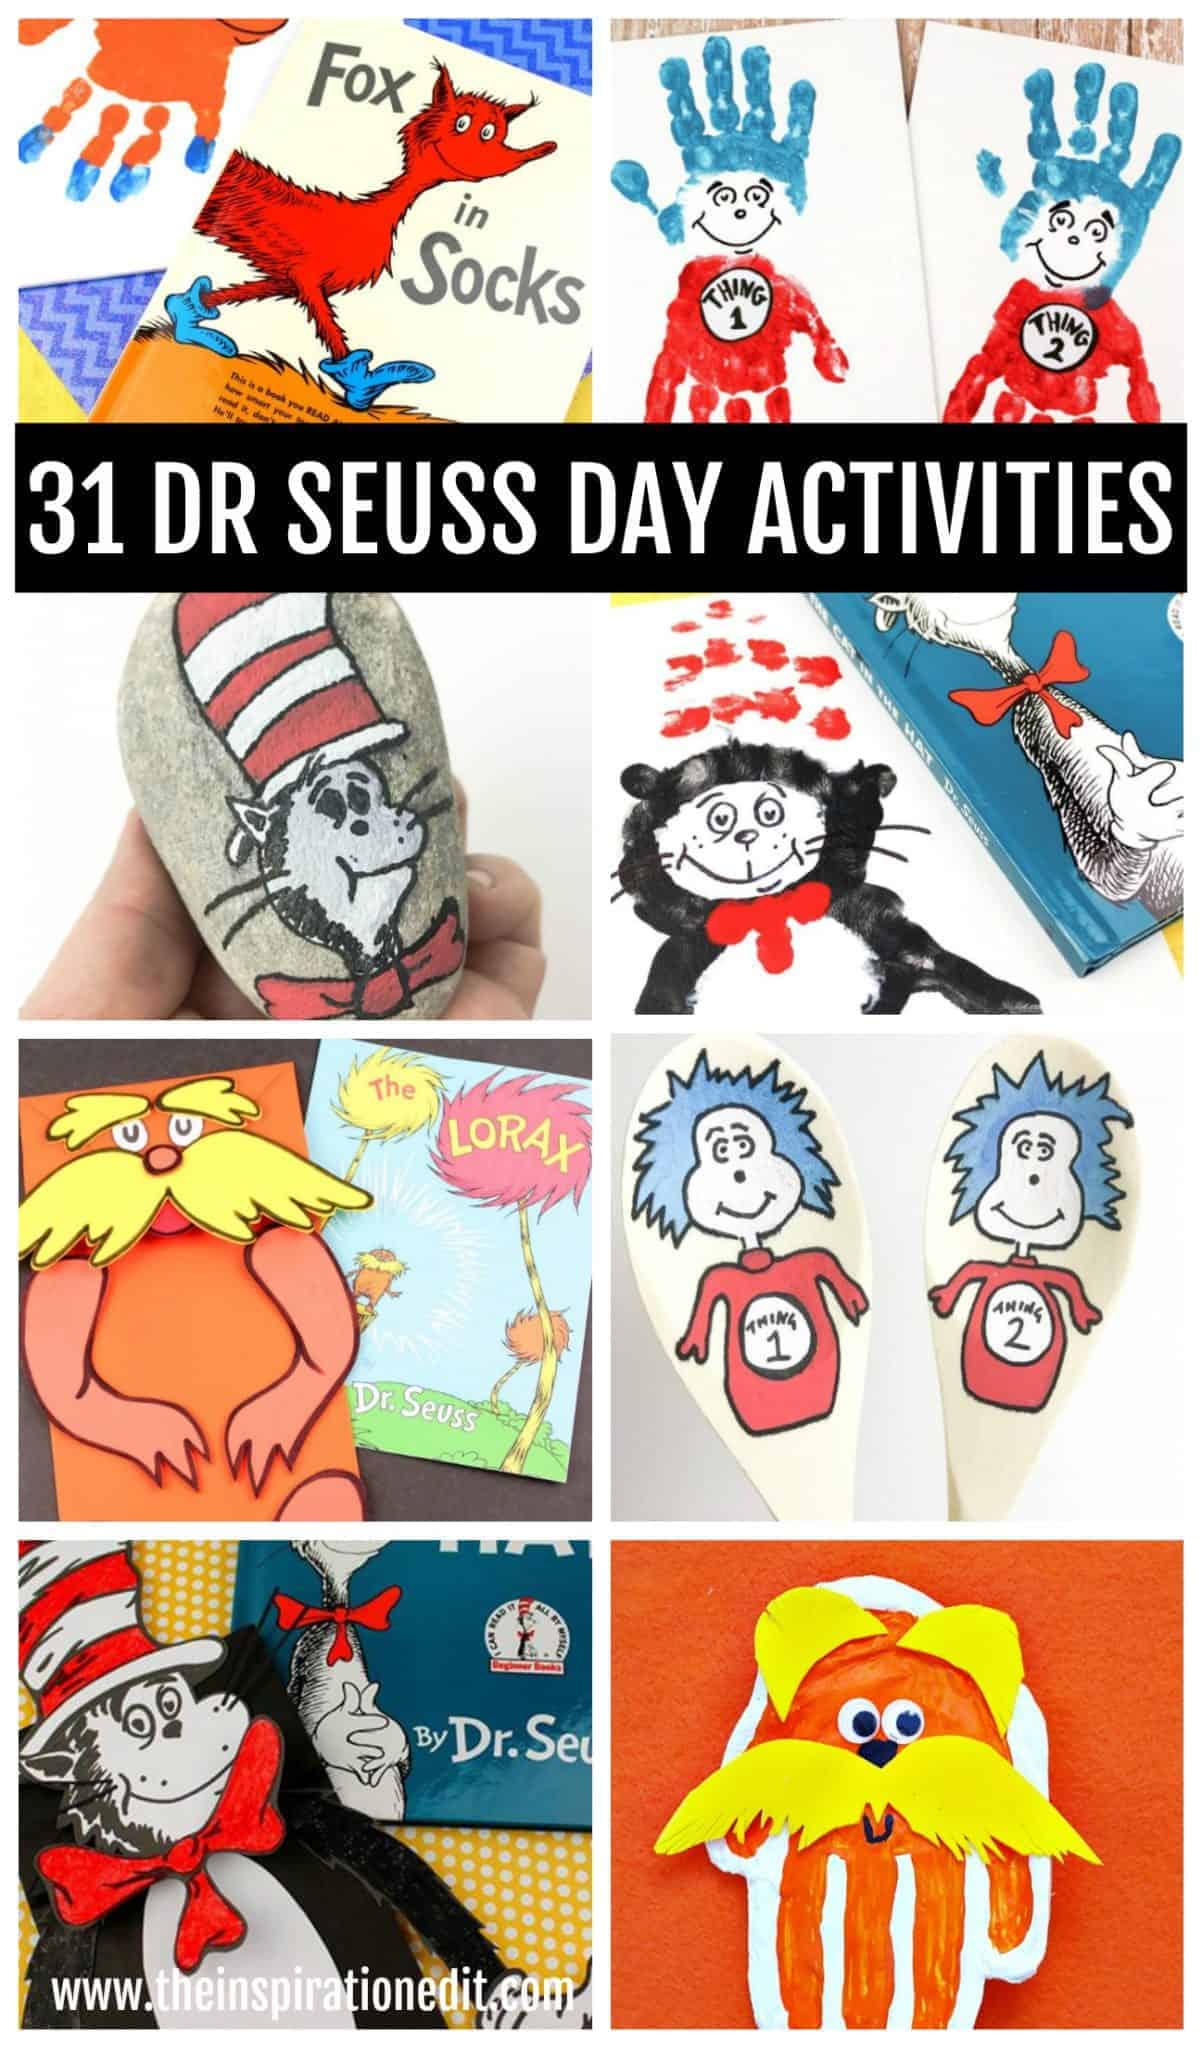 31 Dr Seuss Day Activities Kids Will Love · The Inspiration Edit